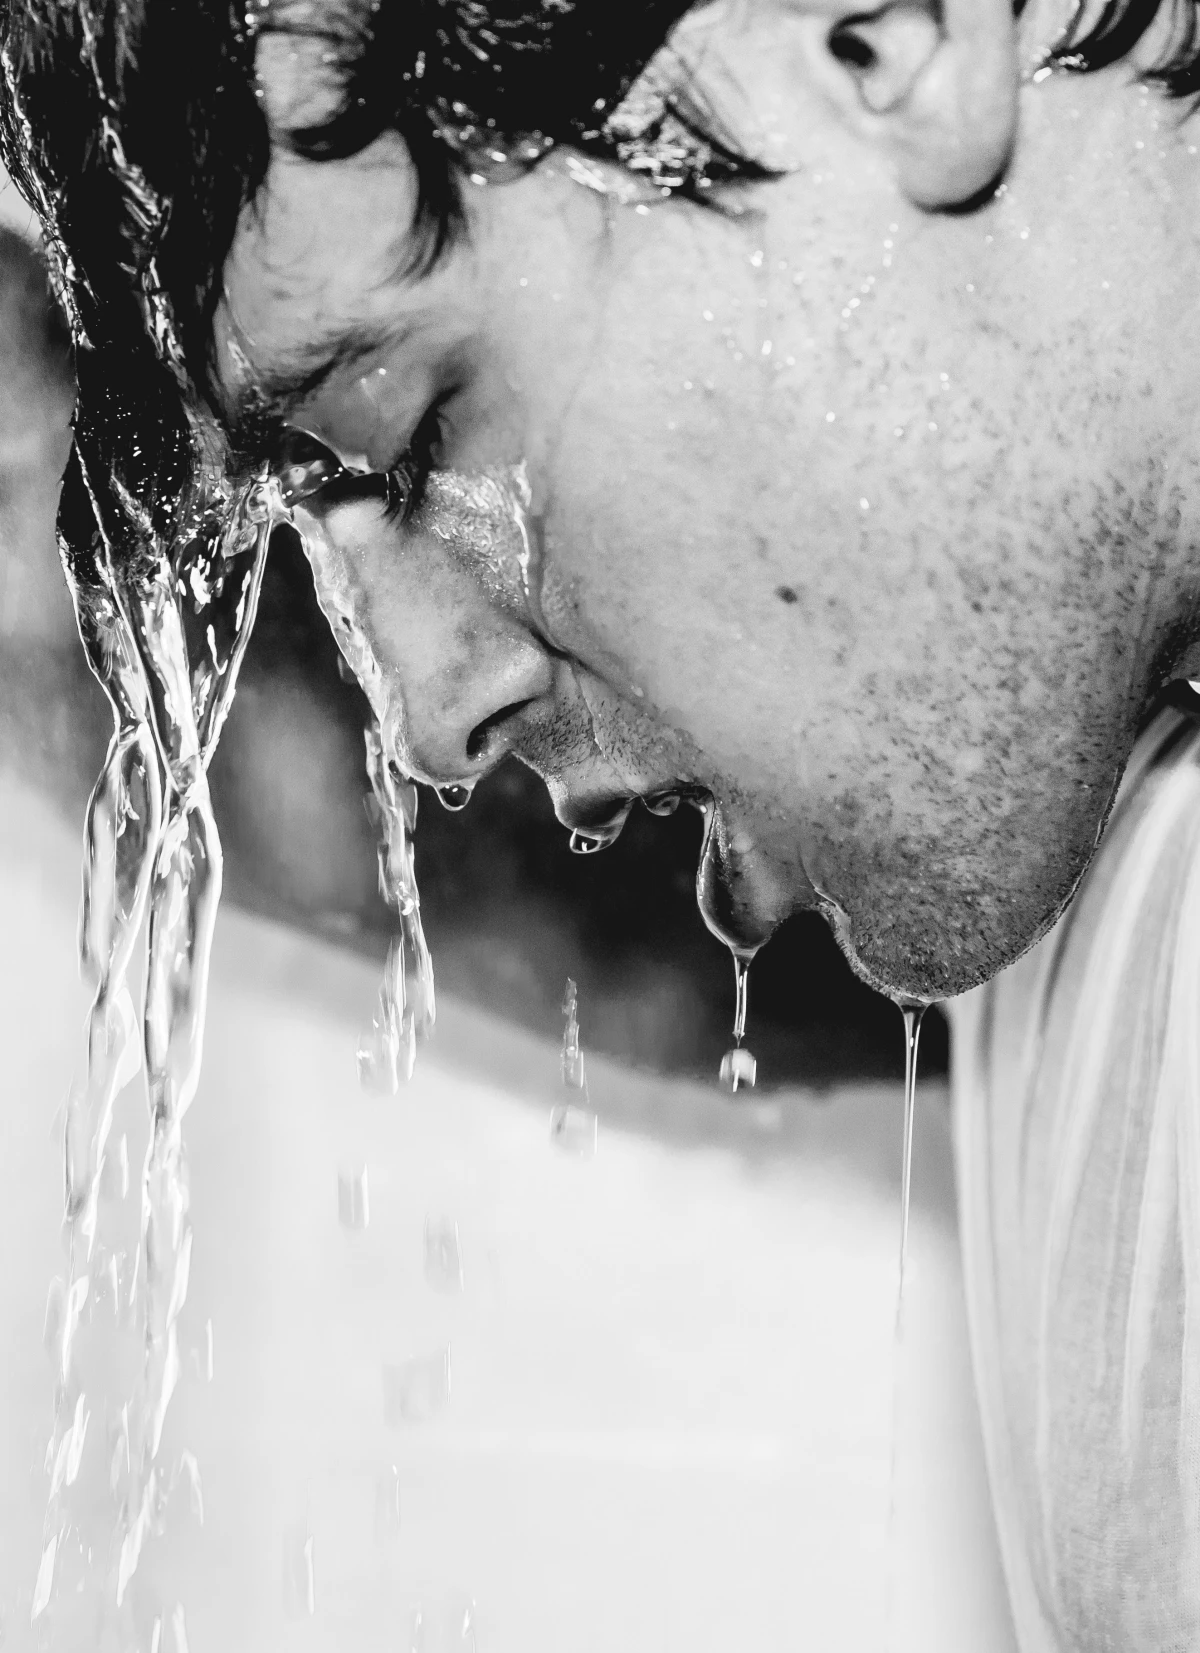 black and white photo of man showering